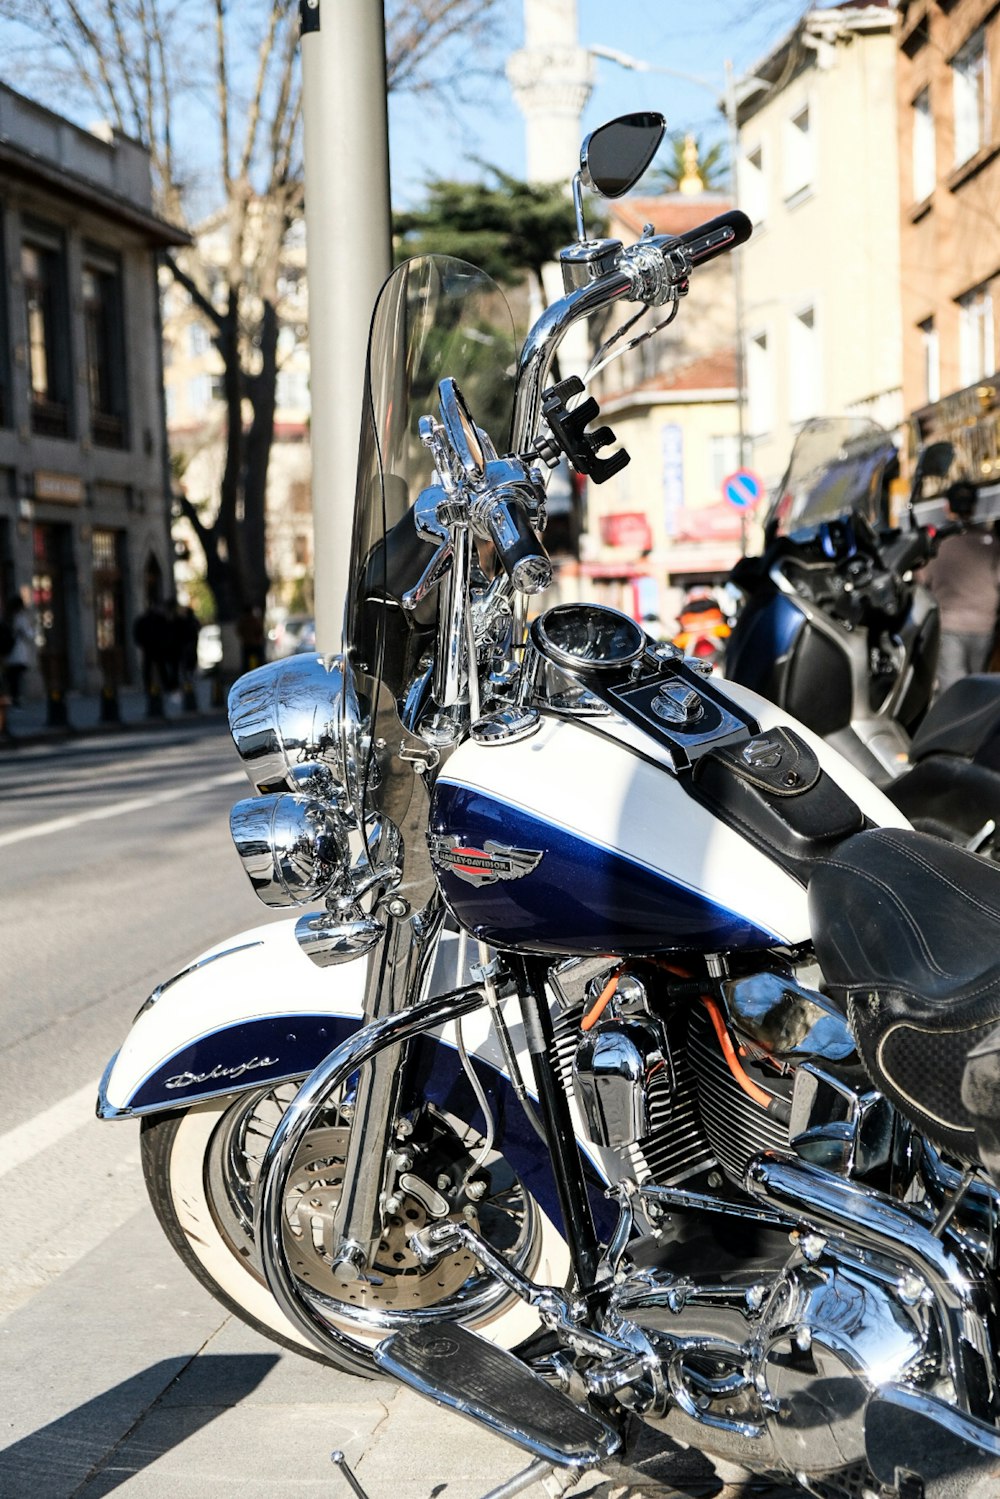 blue and black motorcycle on road during daytime